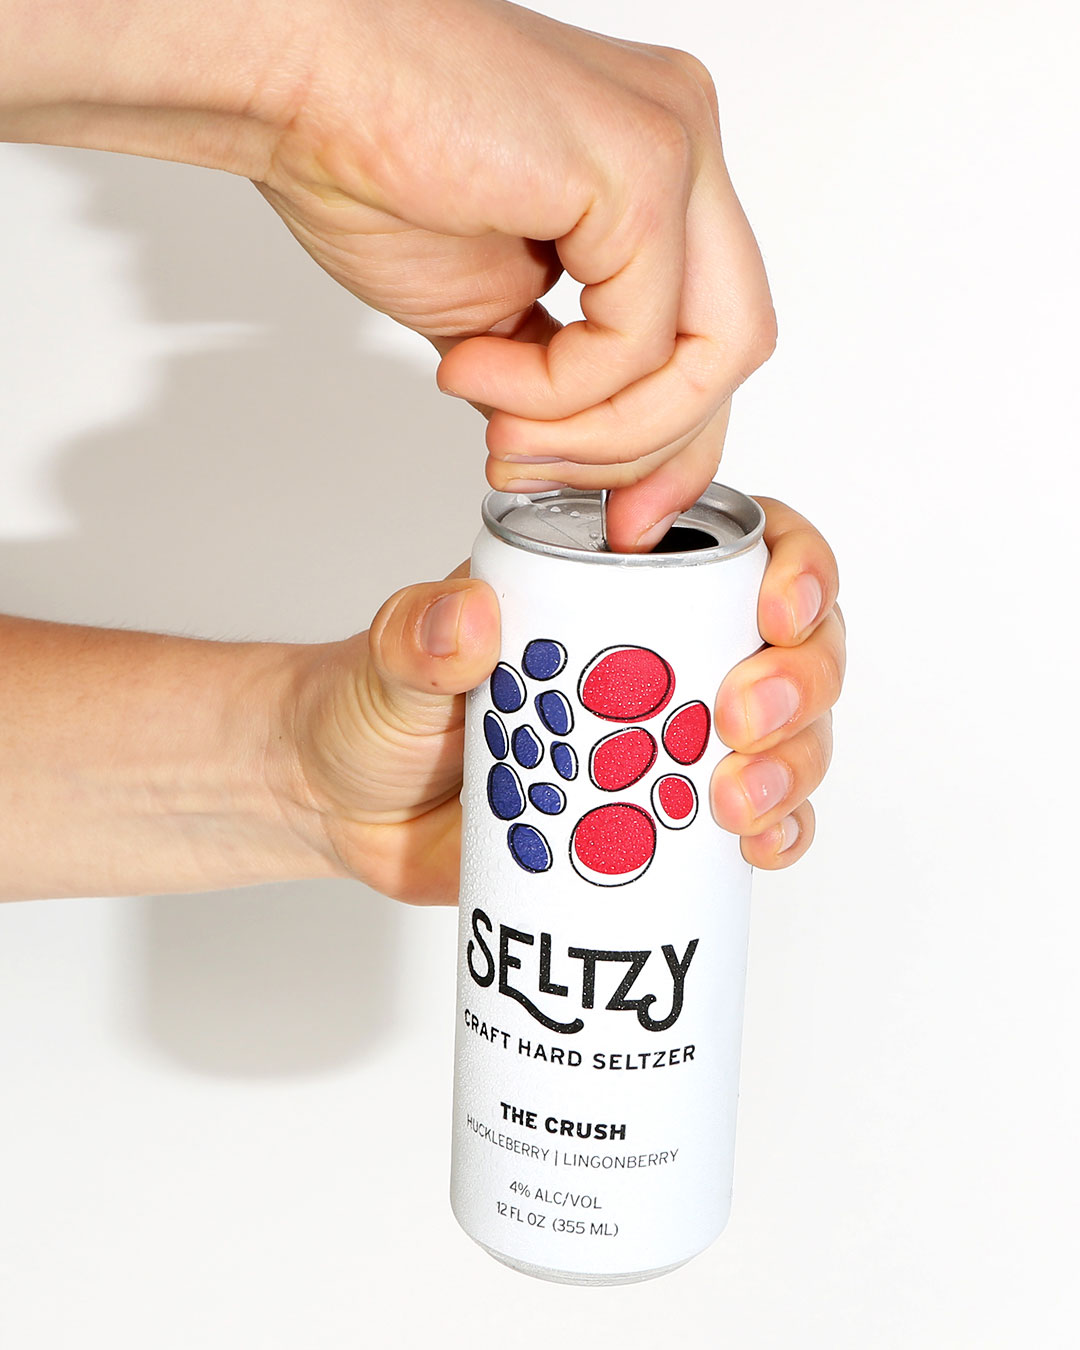 cracking open a can of seltzy